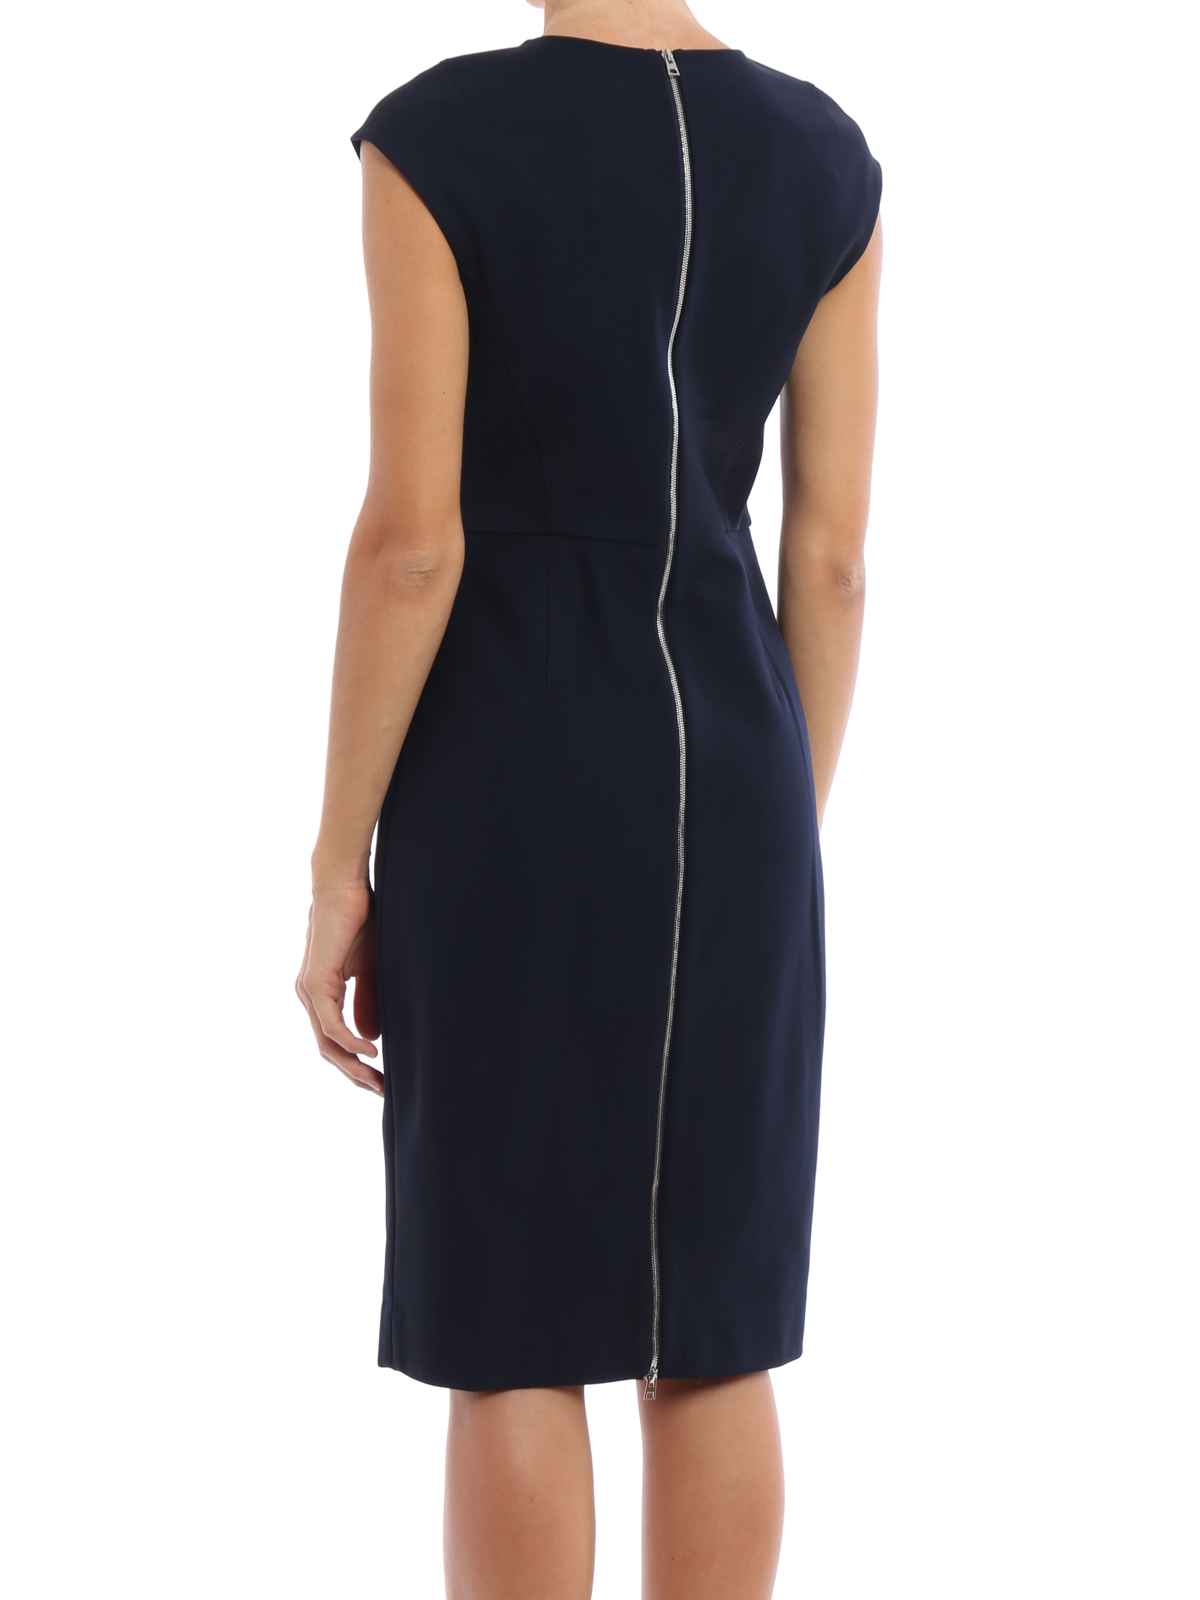 jersey dress with zip